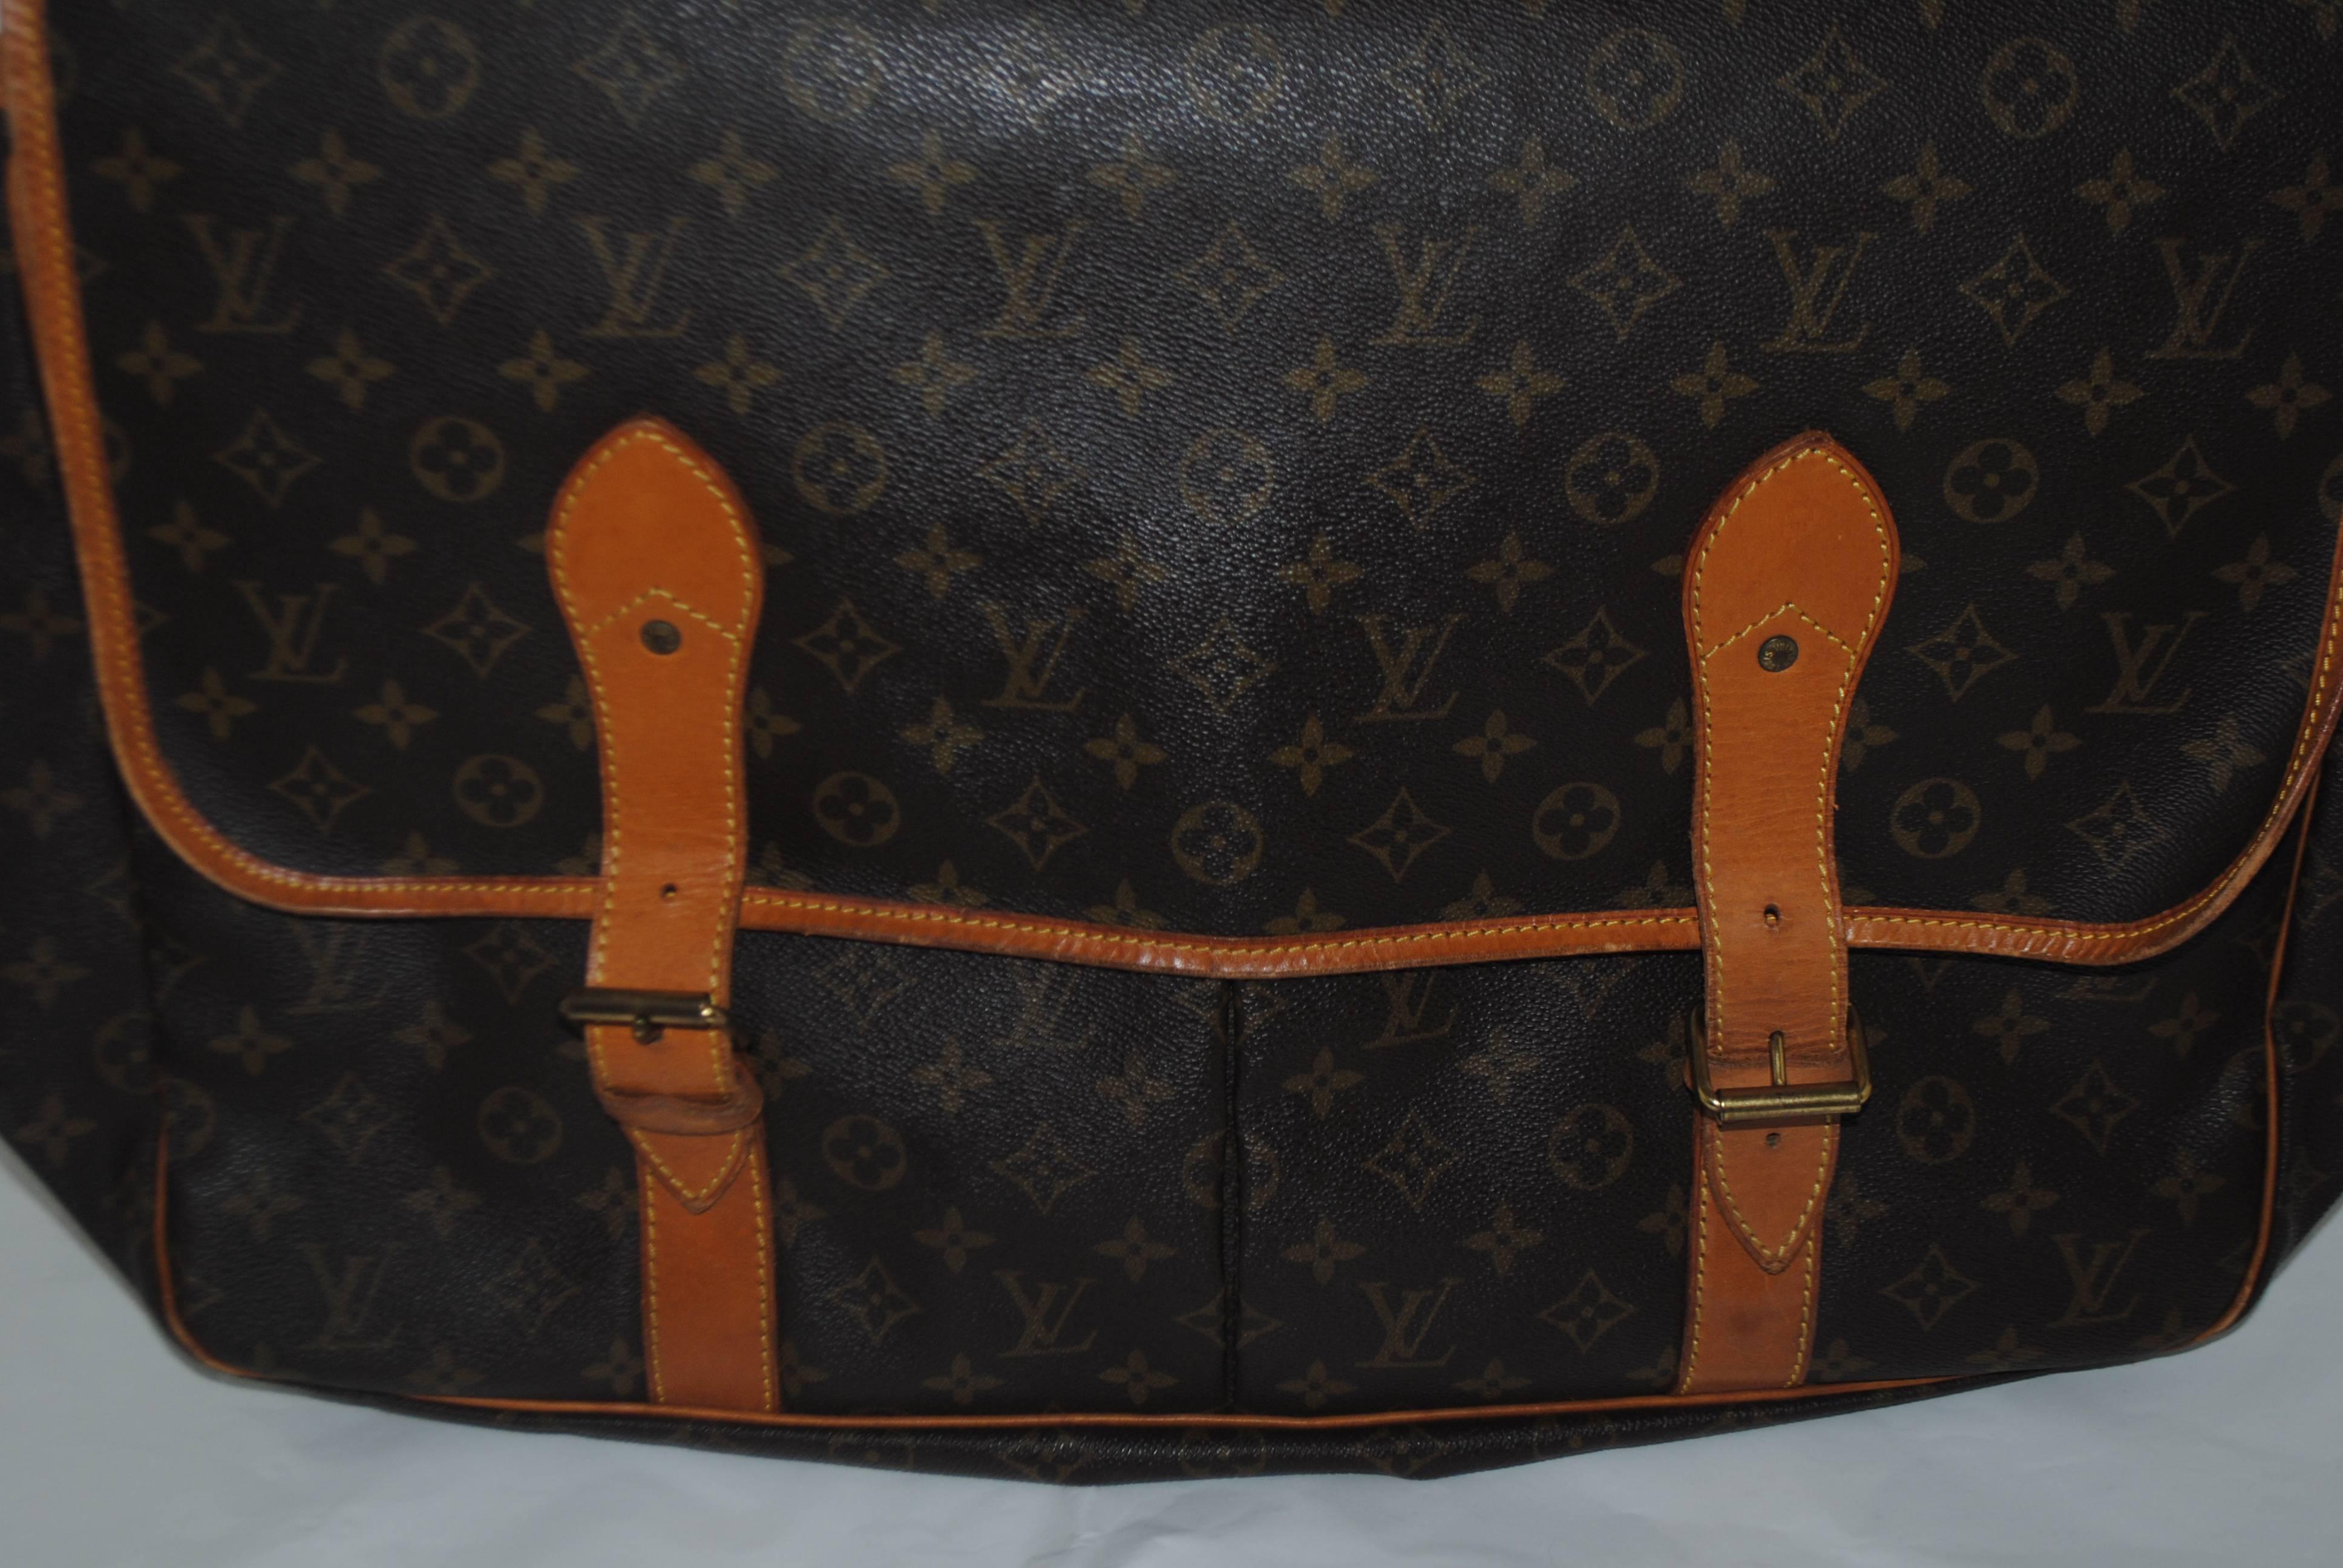 Louis Vuitton Sac Chasse Hunting Monogram Travel Bag
Brown and tan cotton and leather 'Sac Chasse' travel bag from Louis Vuitton Vintage featuring a front flap closure, a monogram print, a top handle, a buckle fastening, side buckle fastenings, a